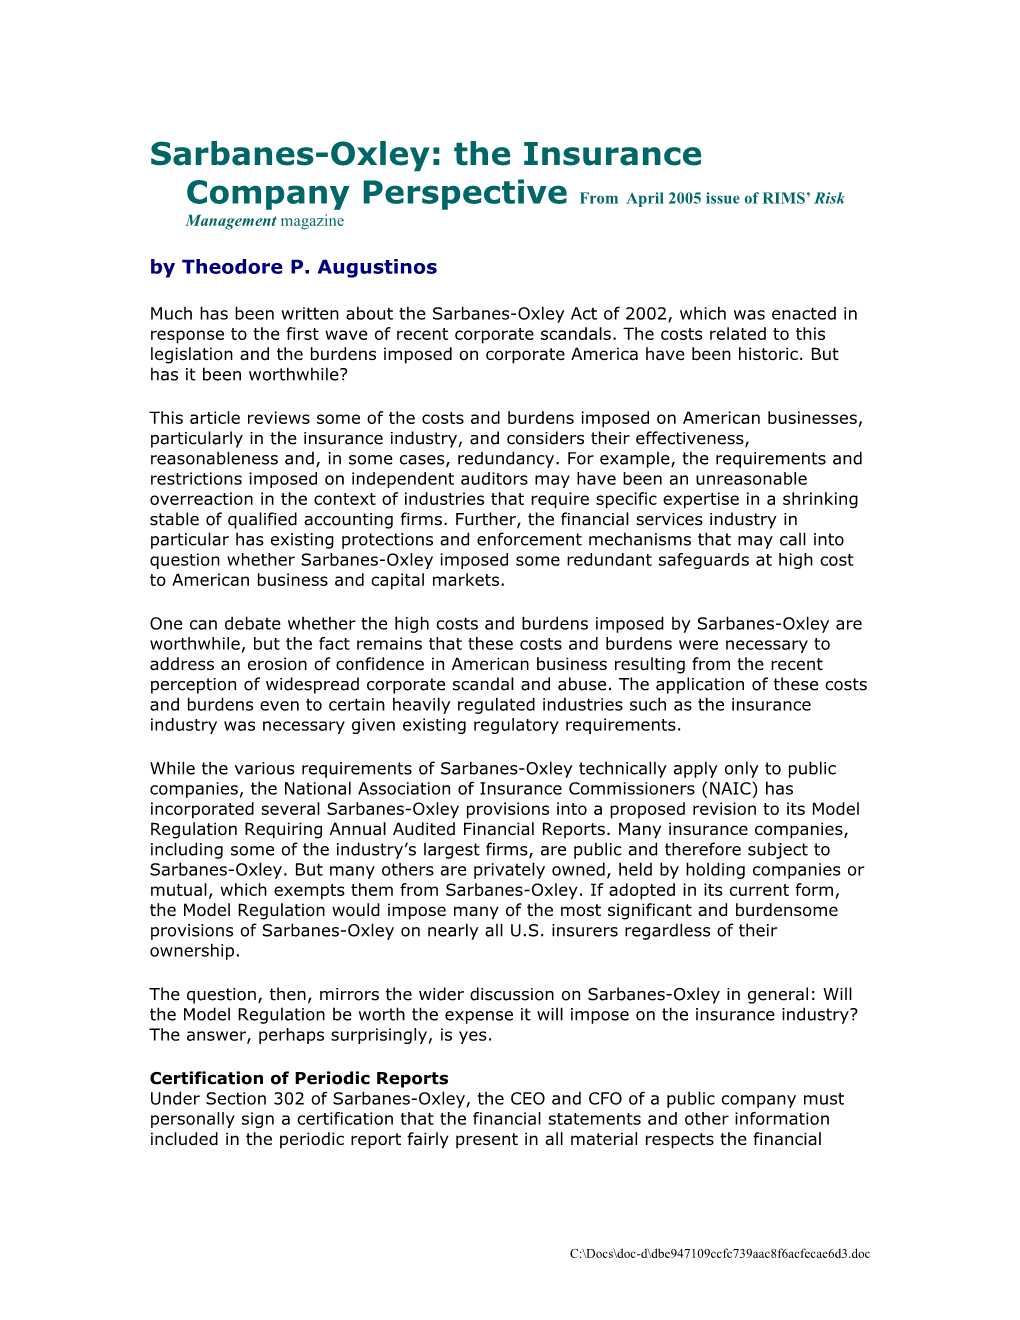 Sarbanes-Oxley: the Insurance Company Perspective from April 2005 Issue of RIMS Risk Management